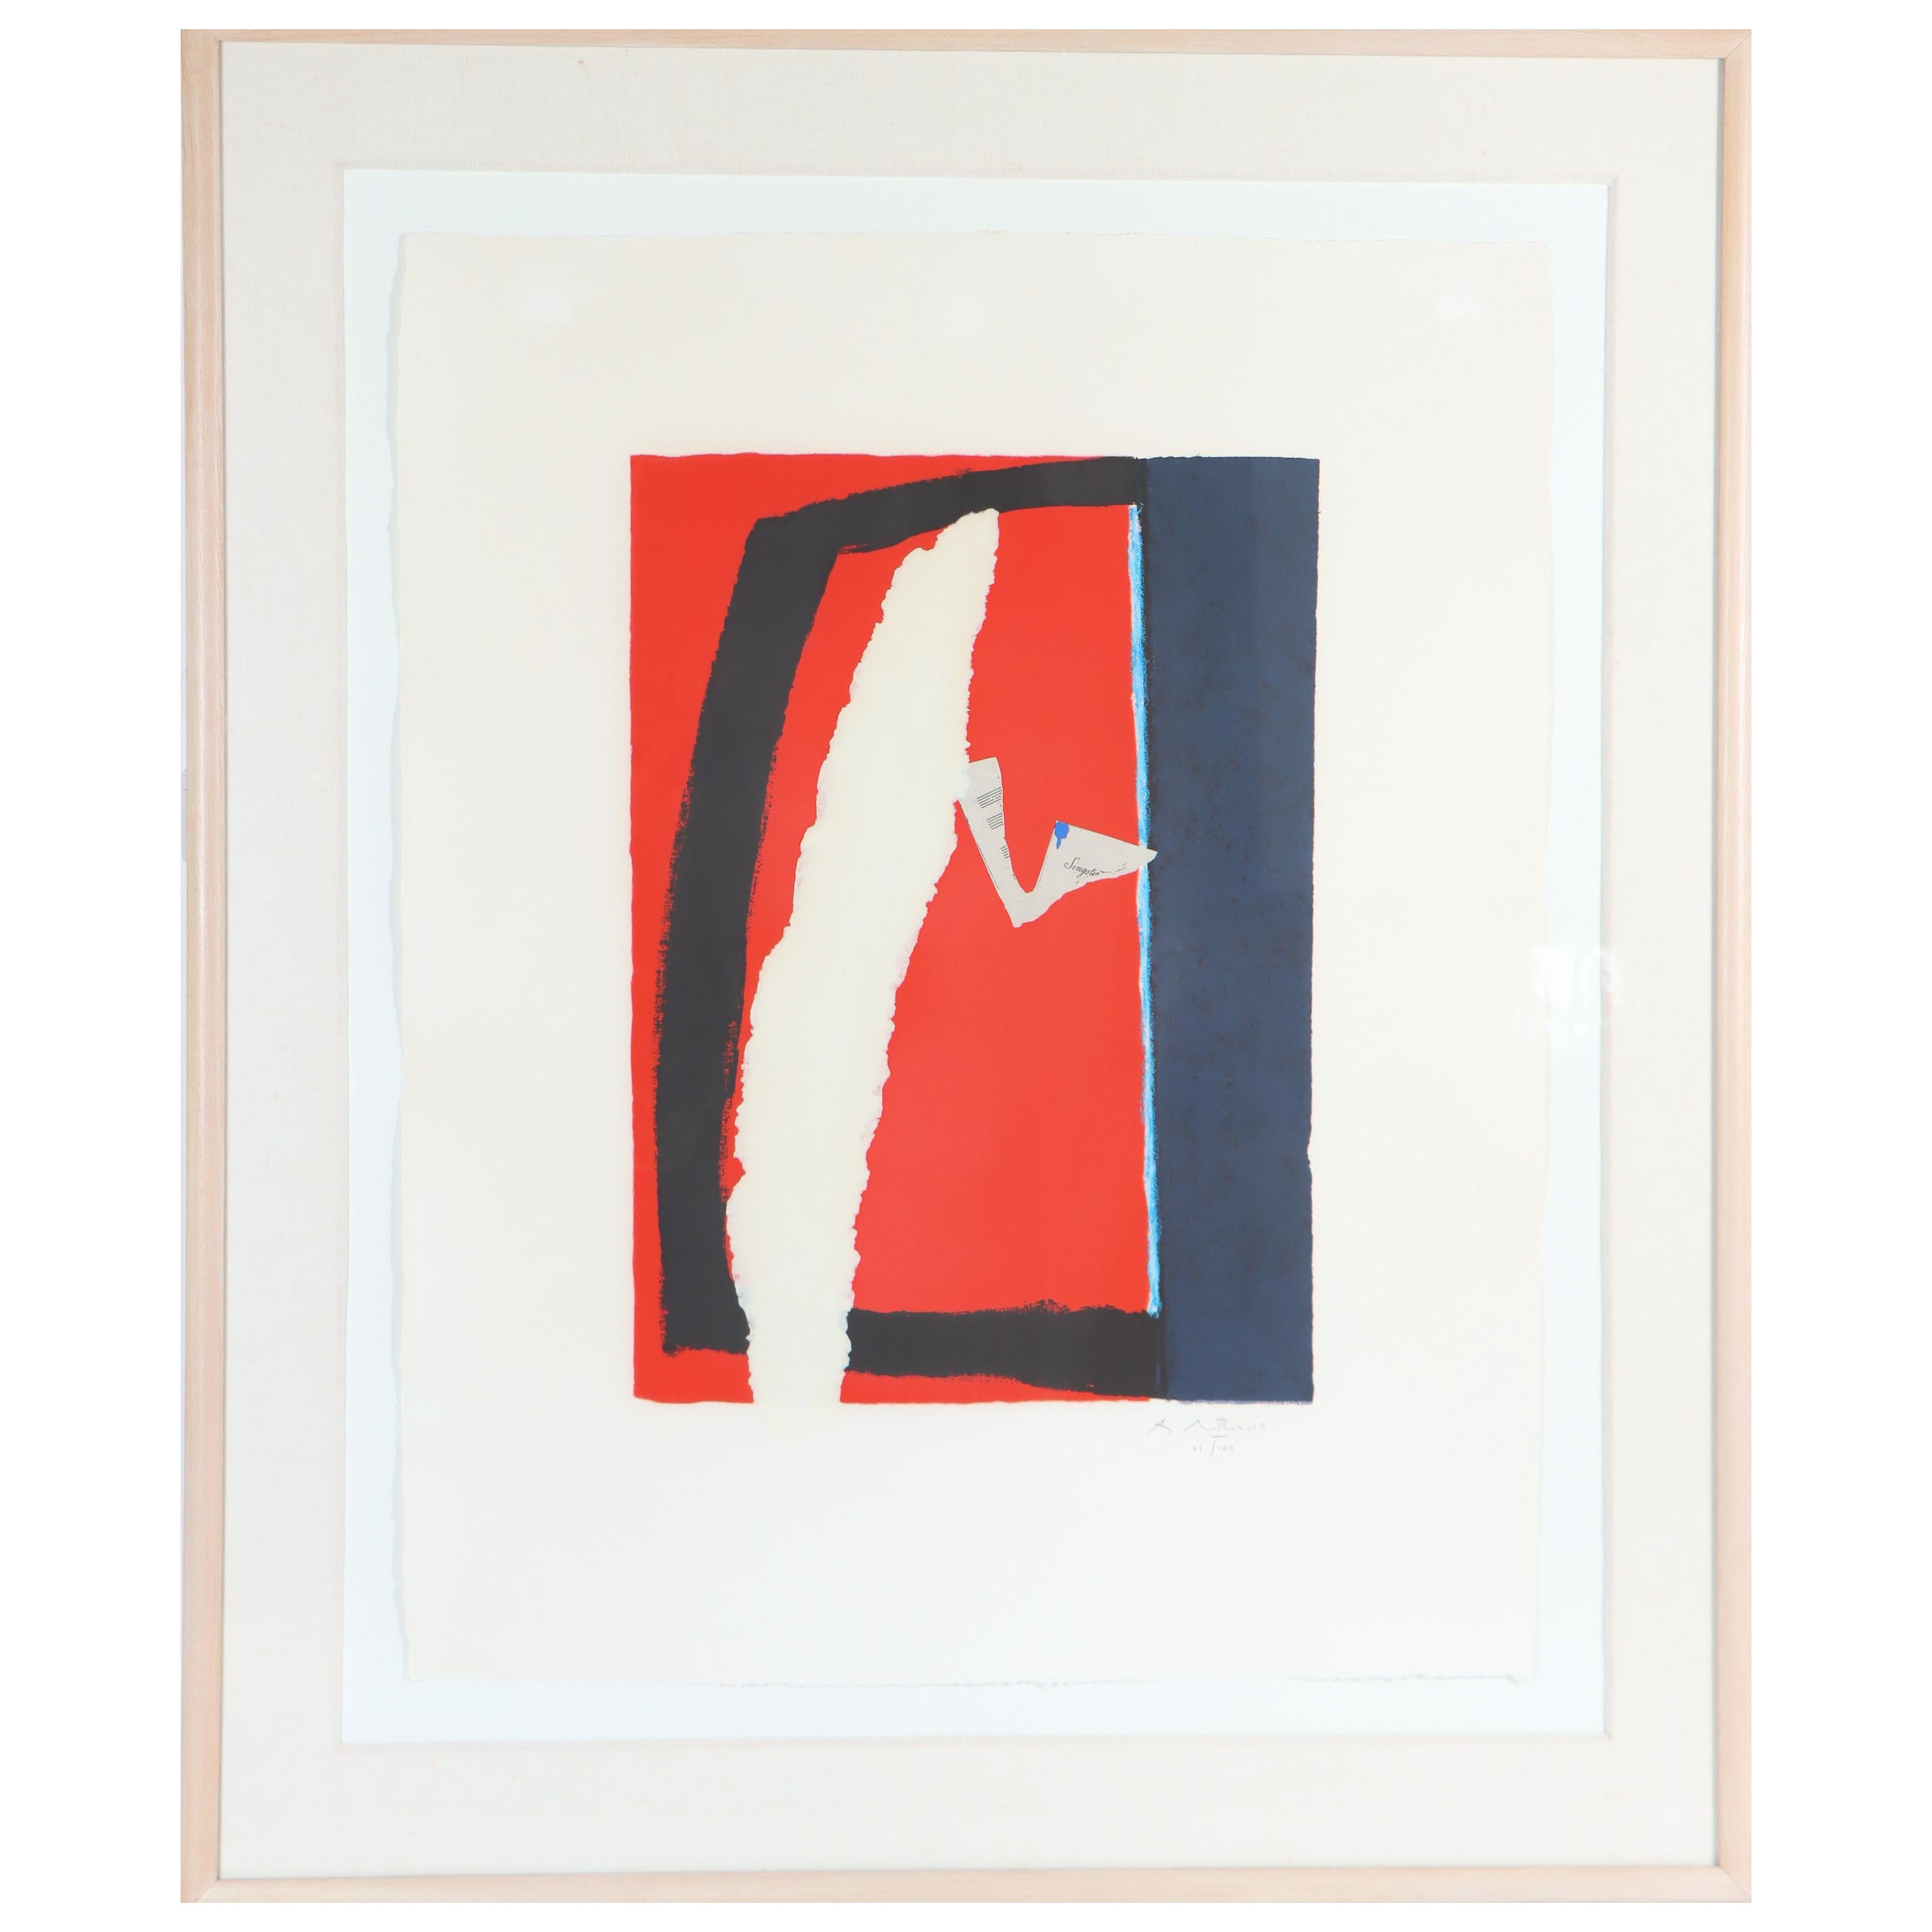 Robert Motherwell (1915-1991), Amer, Lithographie/Collage